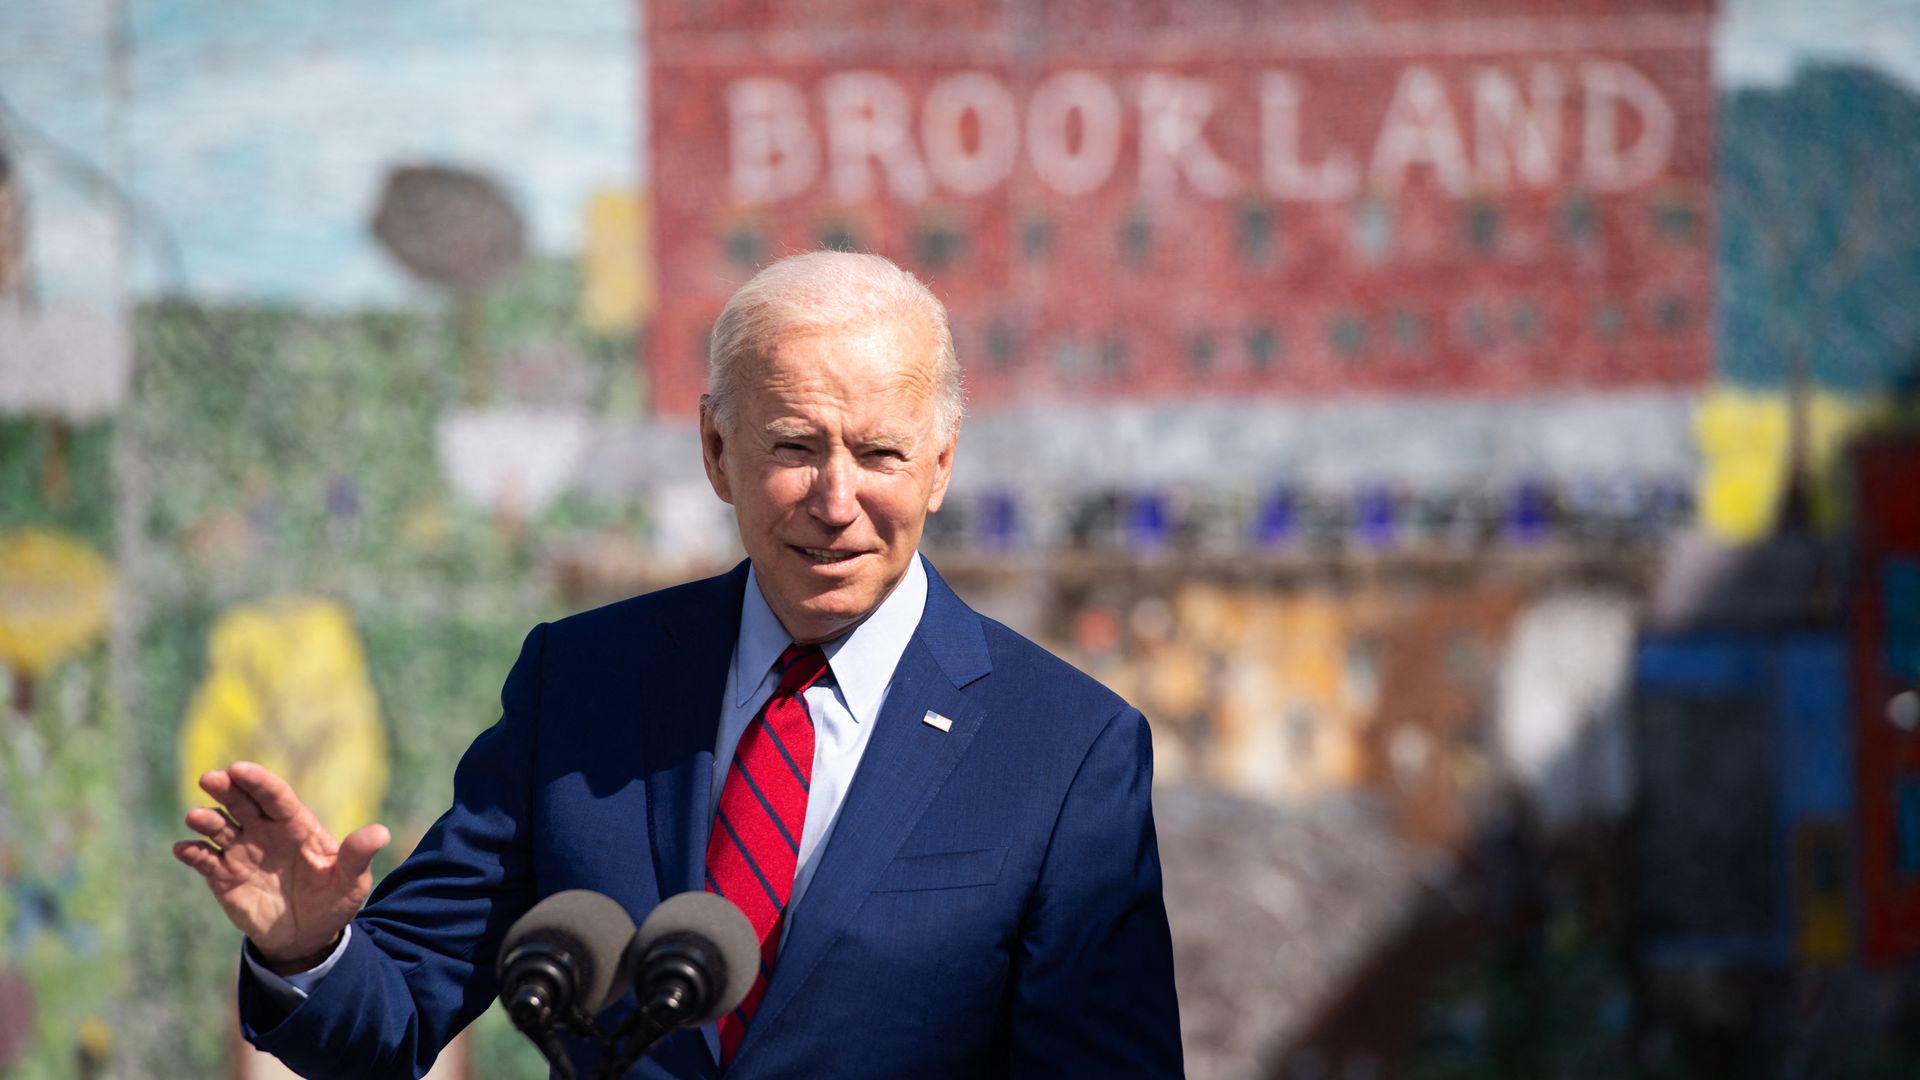  President Joe Biden speaks about coronavirus protections in schools during a visit to Brookland Middle School in Washington, DC, September 10, 2021